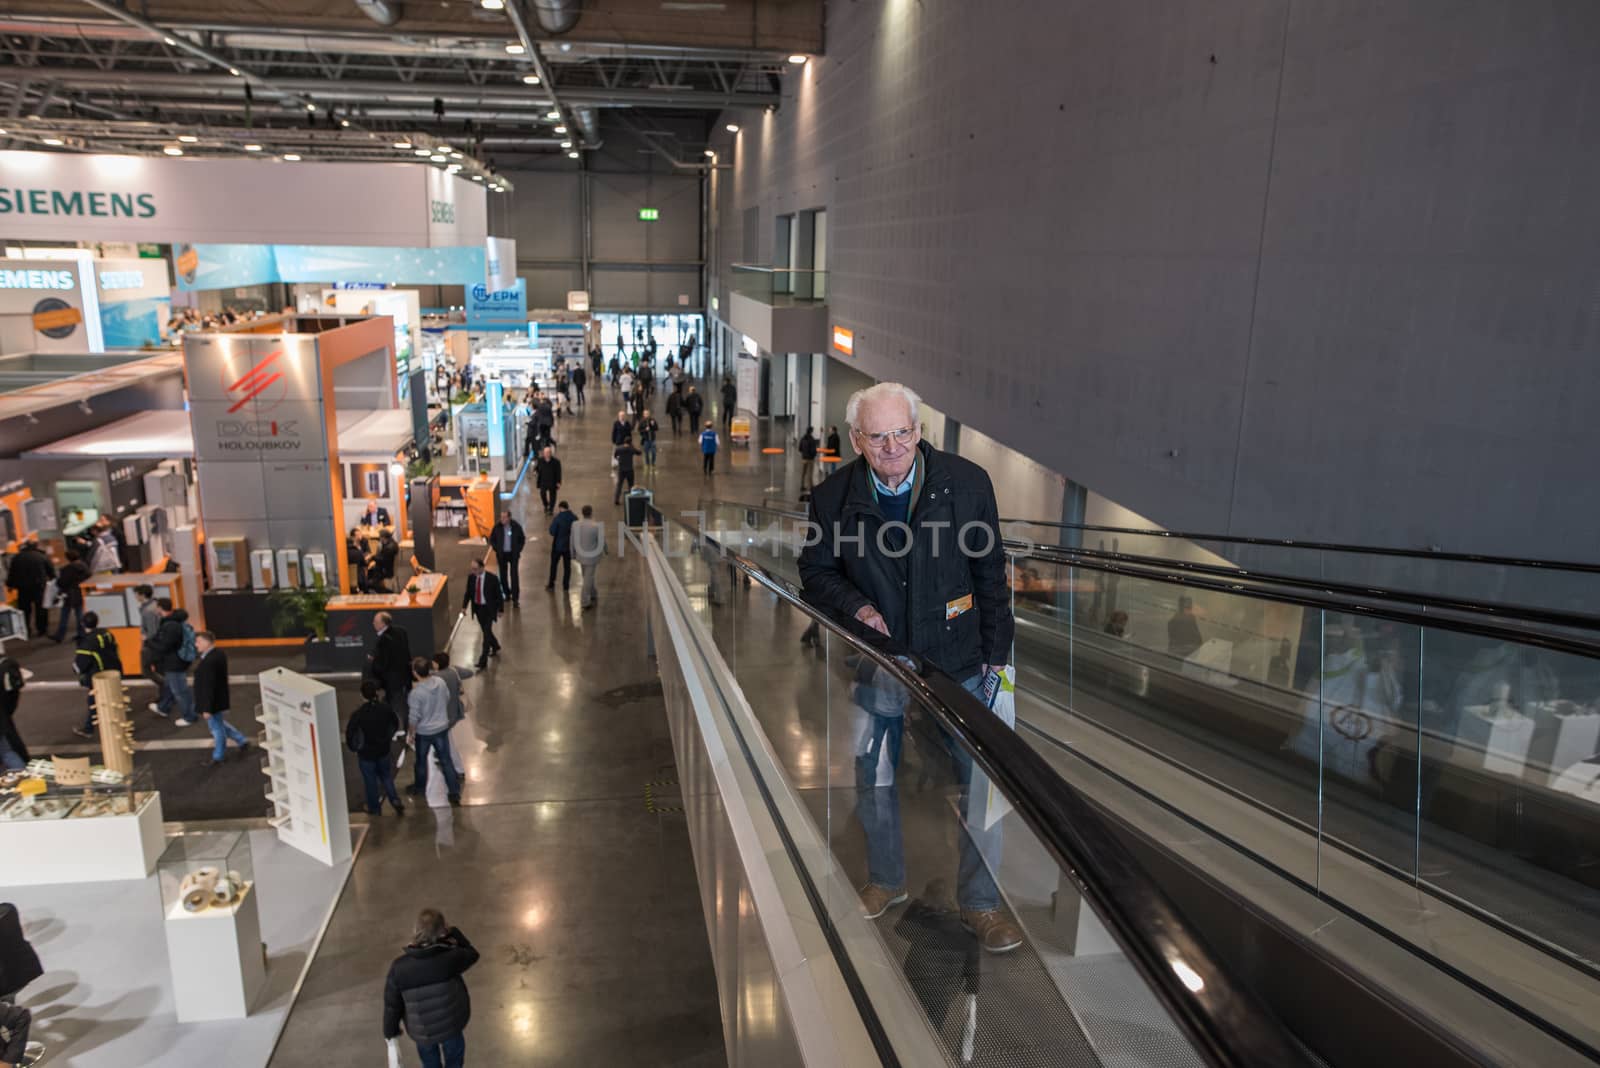 20/05/2018. Brno, Czech Republic. A man is getting a lift by the mechanical stairs at the Amper convention at the Bno Exhibition Center. czech Republic by gonzalobell